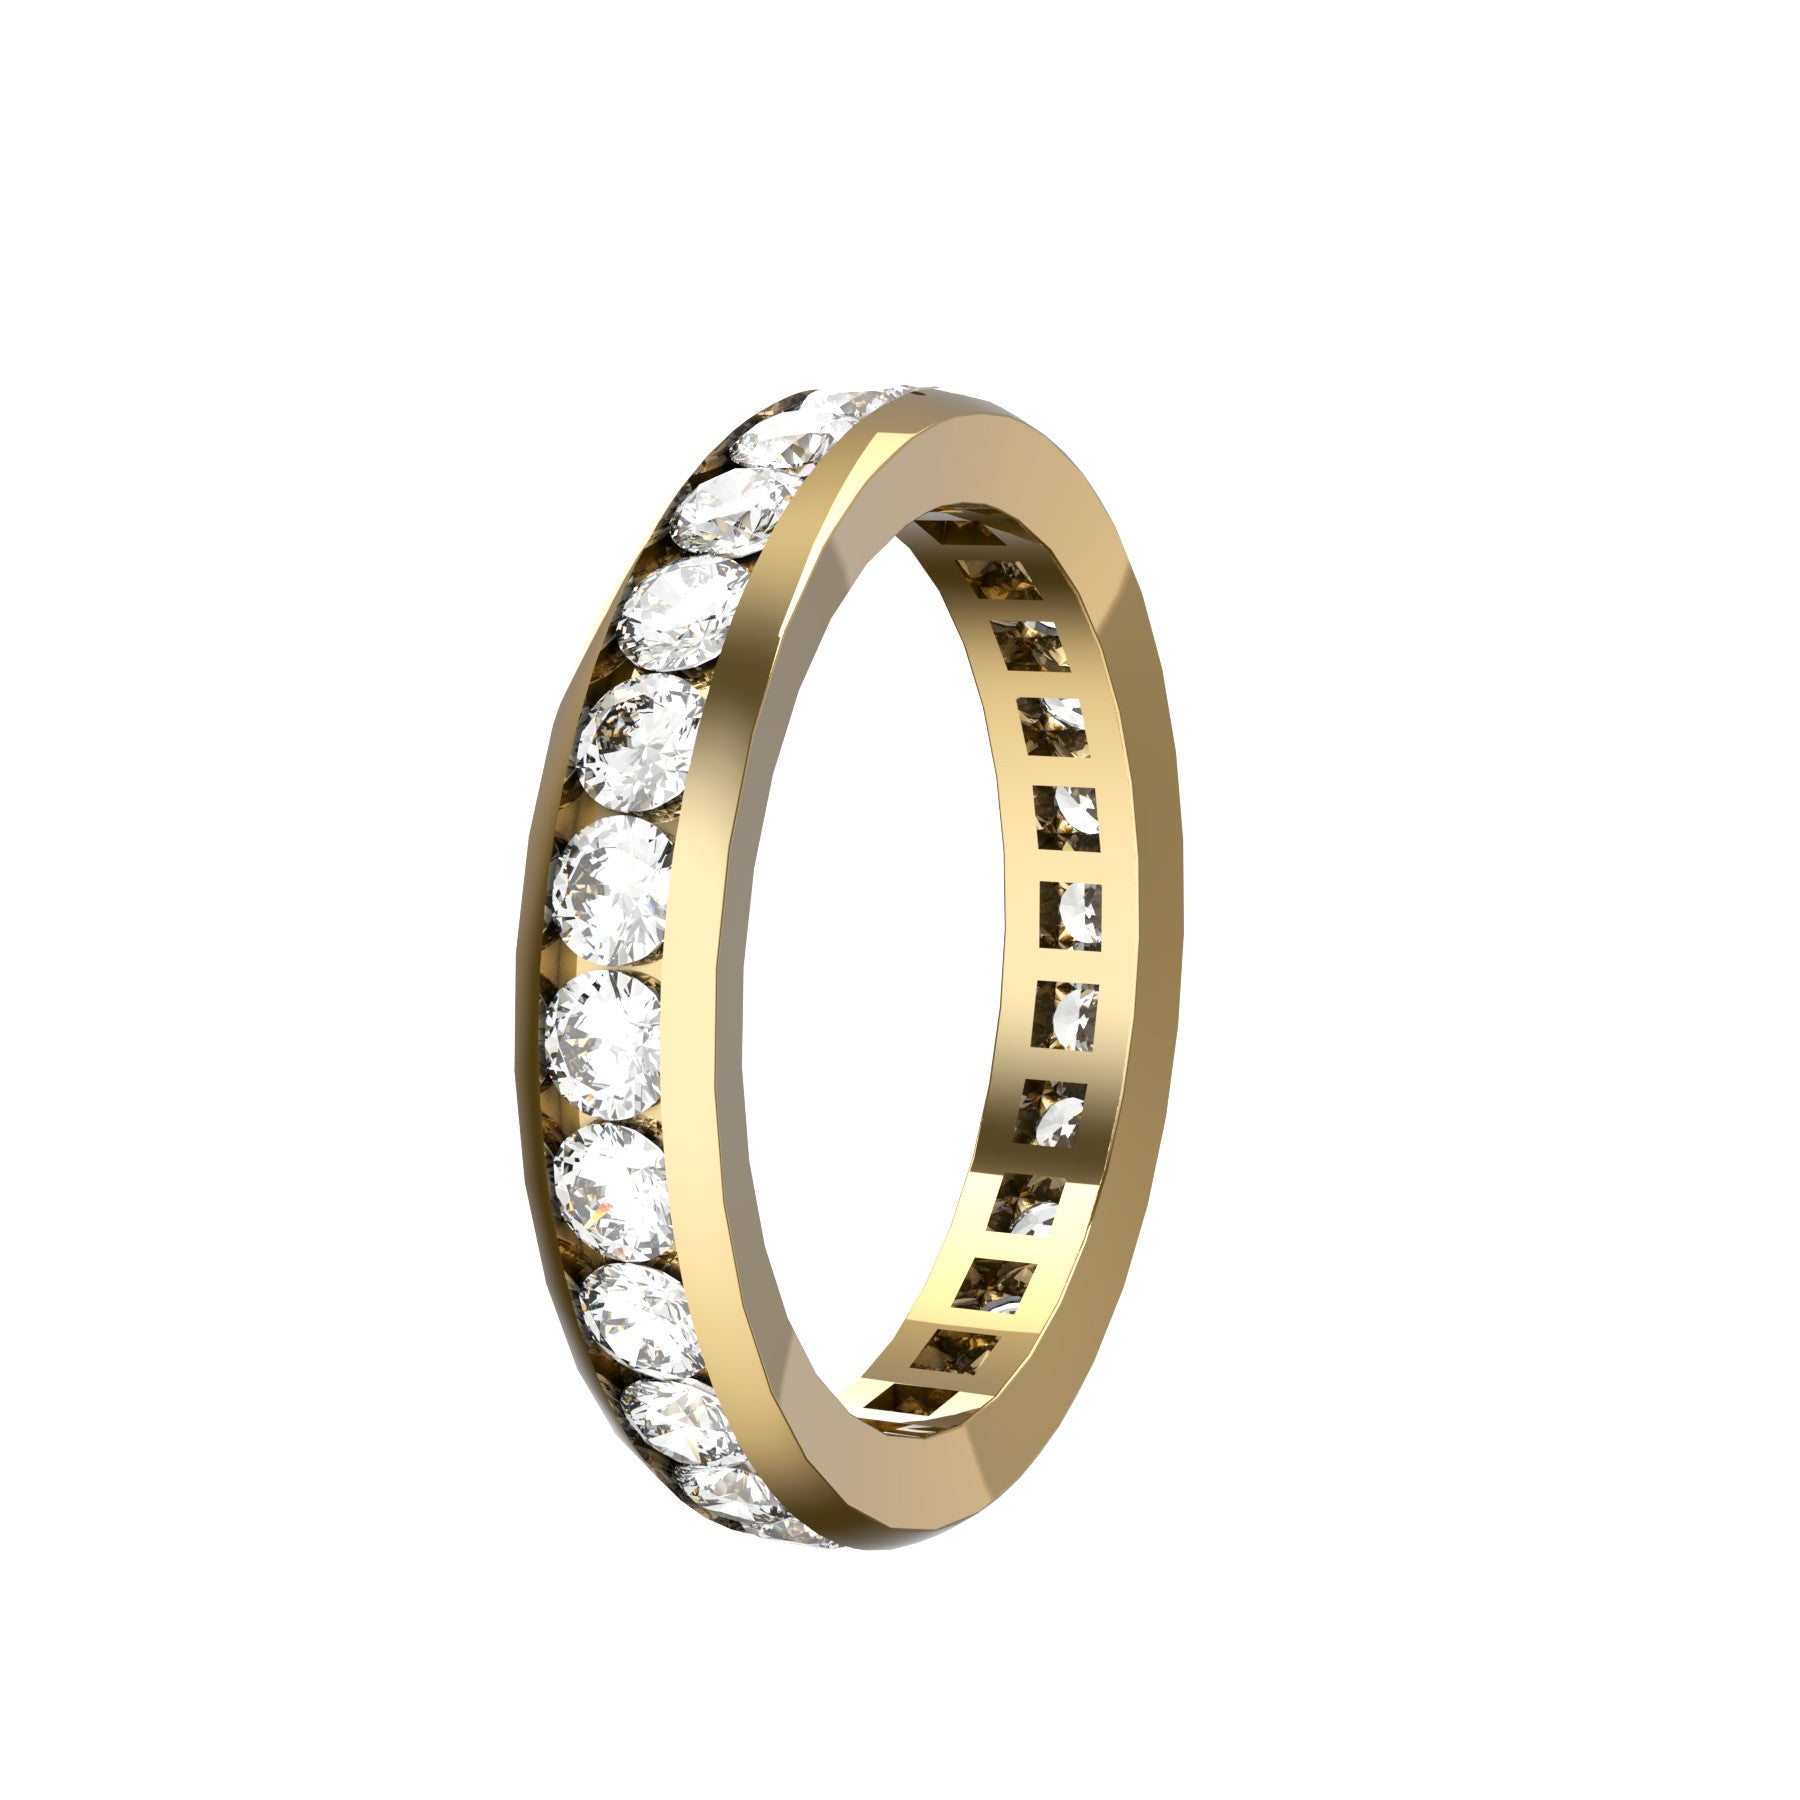  everlasting wedding band, 18 k yellow gold, 0,05 ct round natural diamonds, weight about 3,50 g. (0,12 oz), width 3,70 mm